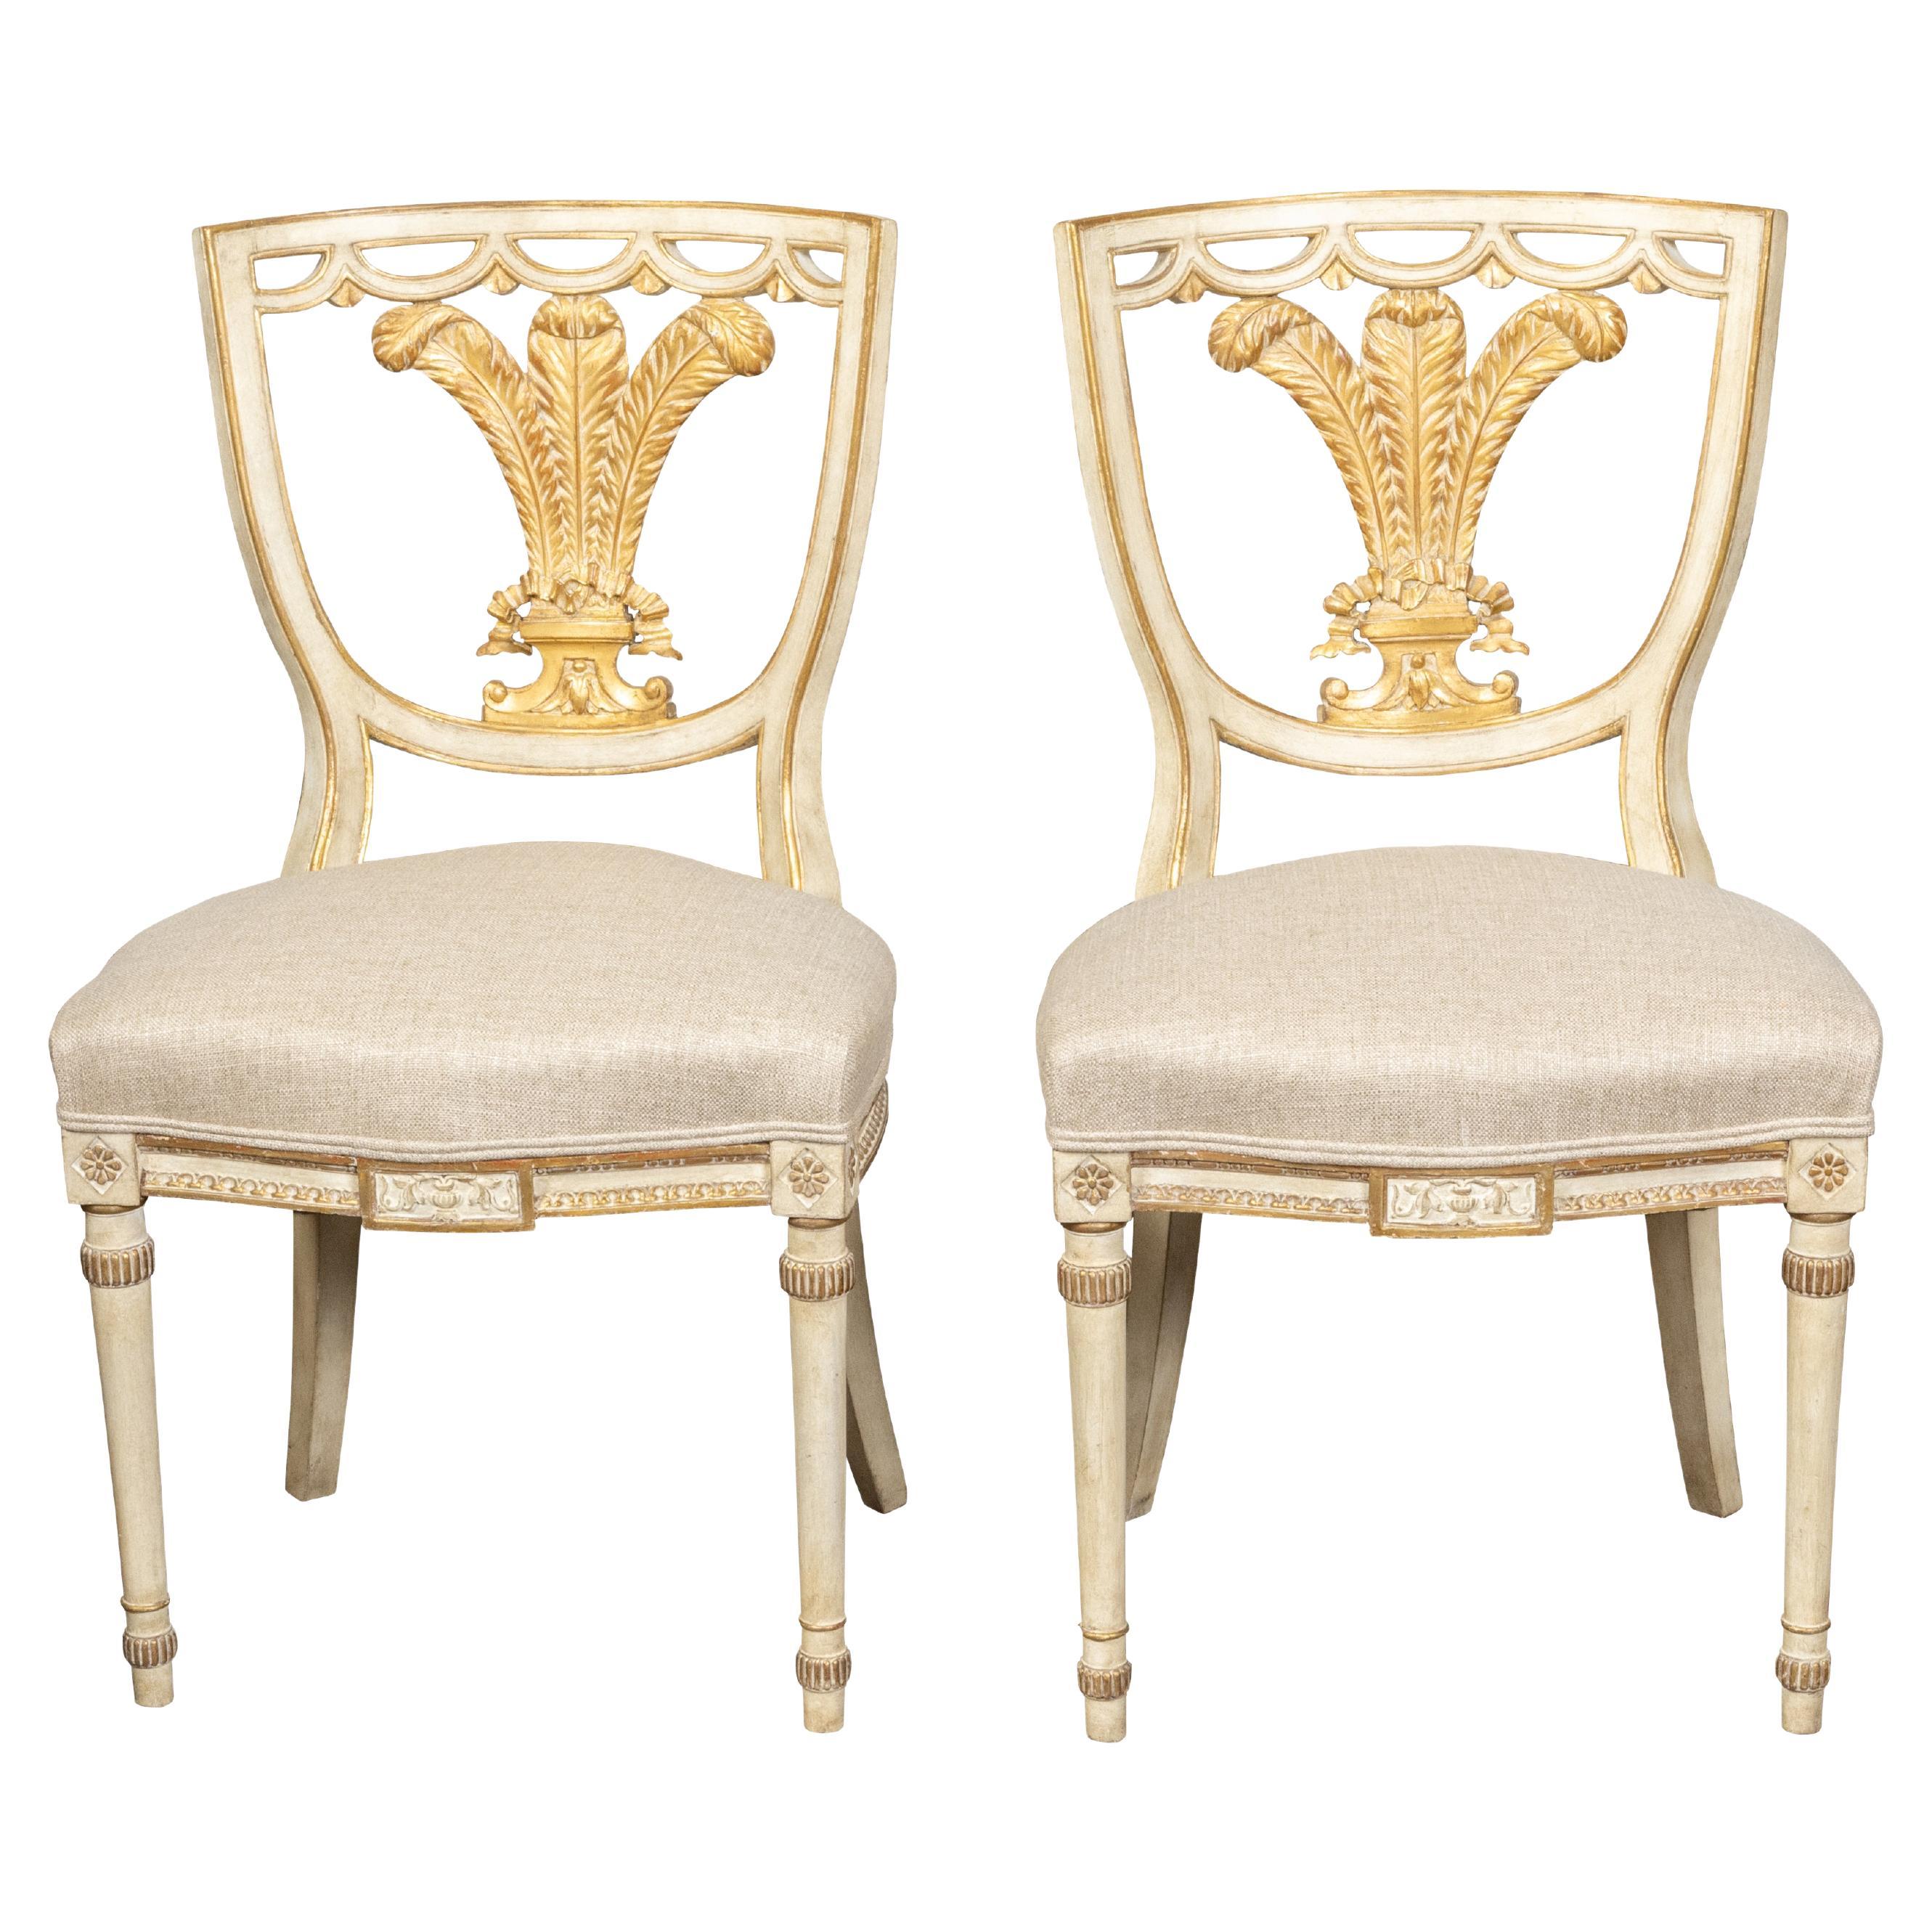 Pair of English 1900s Neoclassical Style Painted and Gilt Chairs with Feathers For Sale